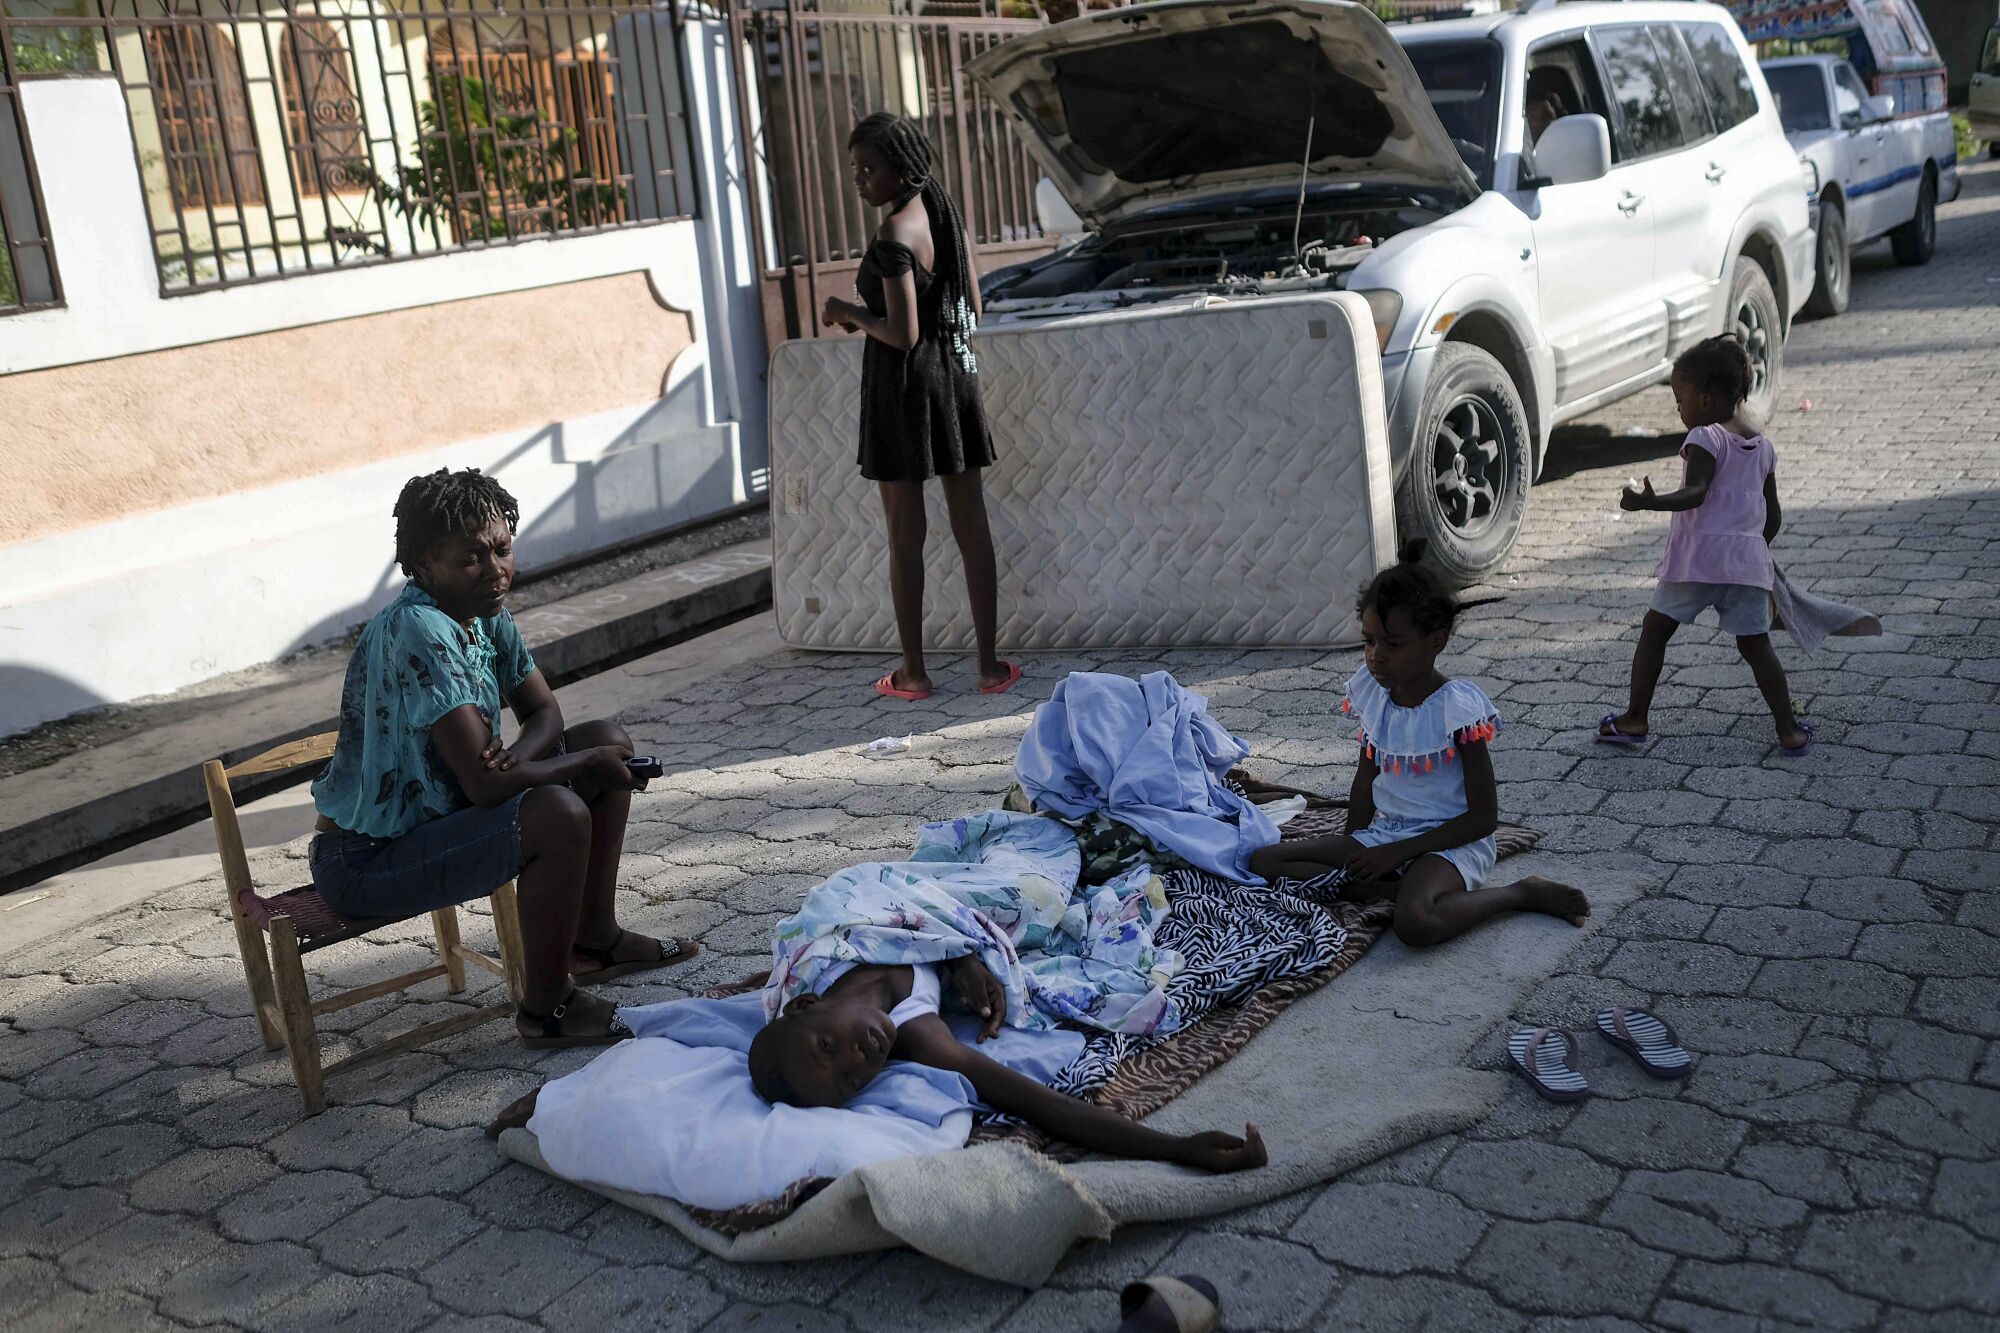 A person lies on bedding in a street while other people stand or sit nearby